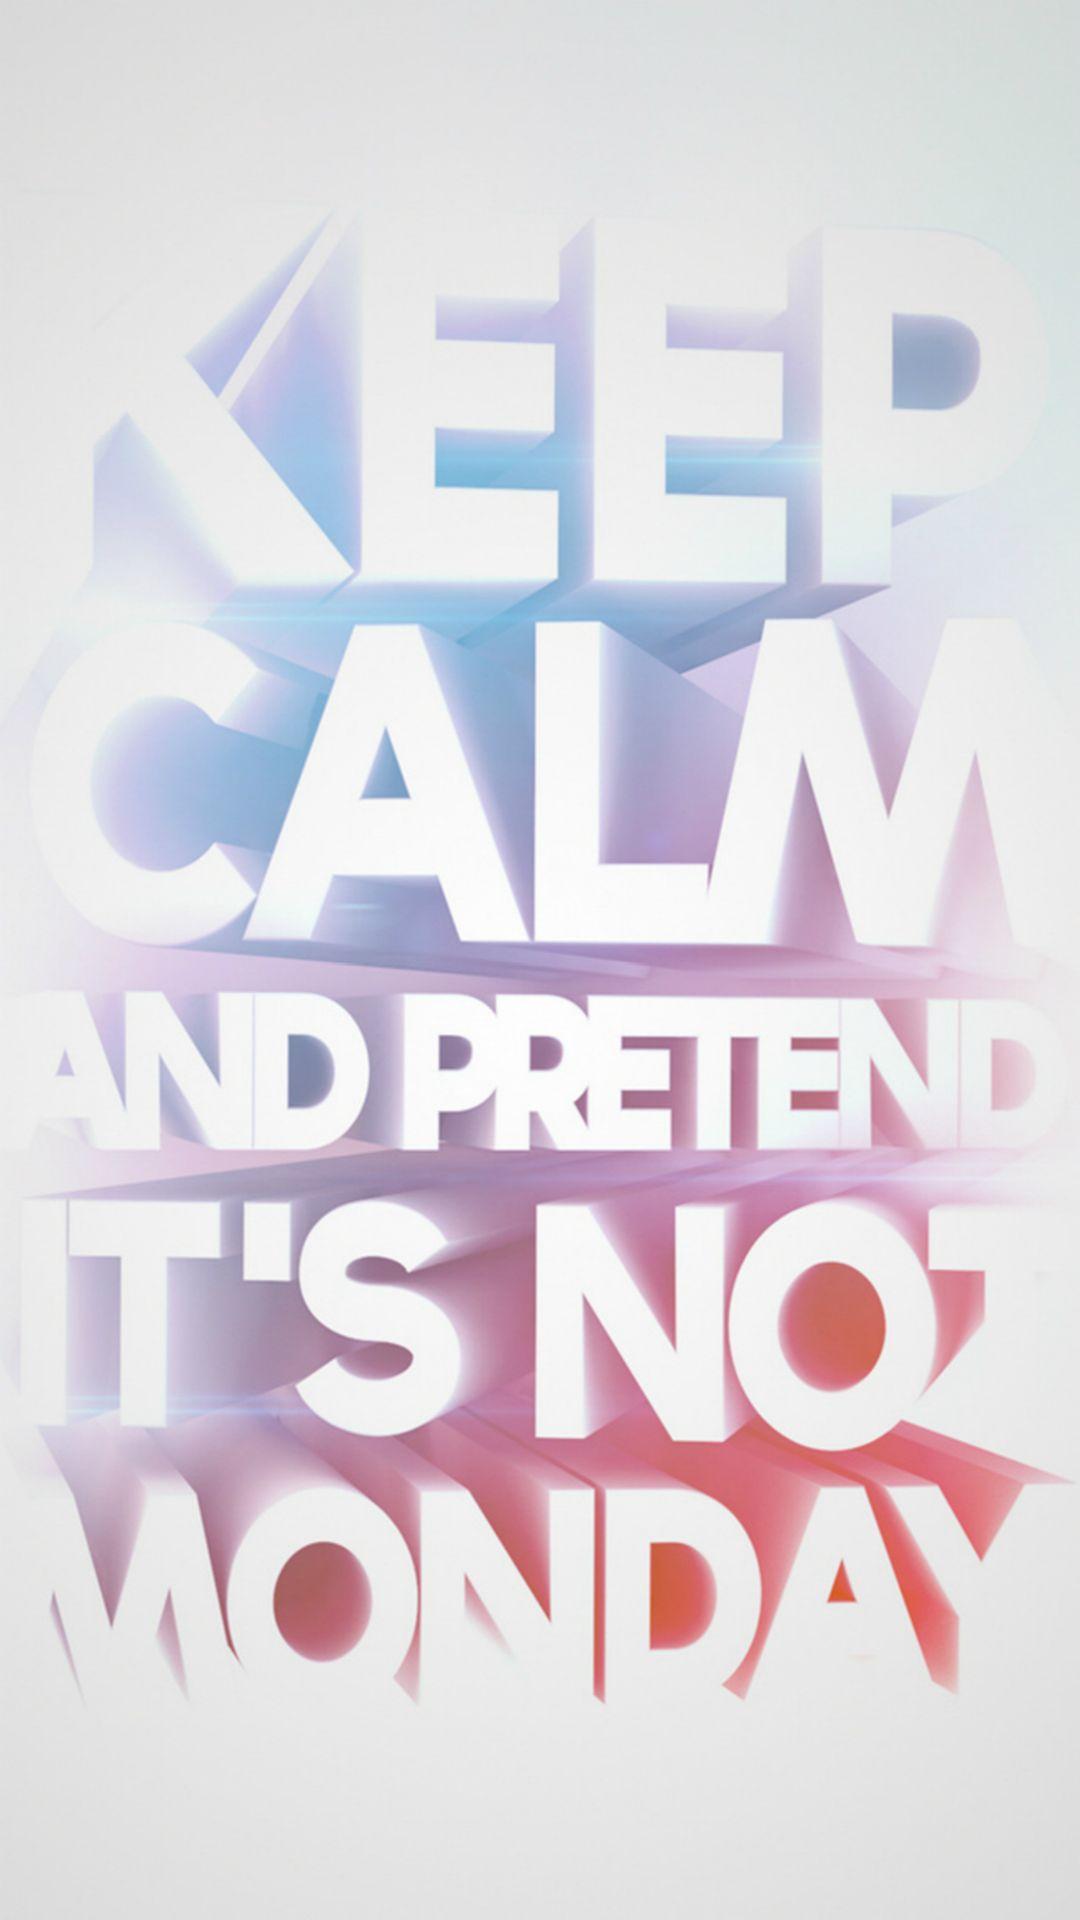 Fun Text Keep Calm And Pretend It's Not Monday iPhone 6 wallpaper